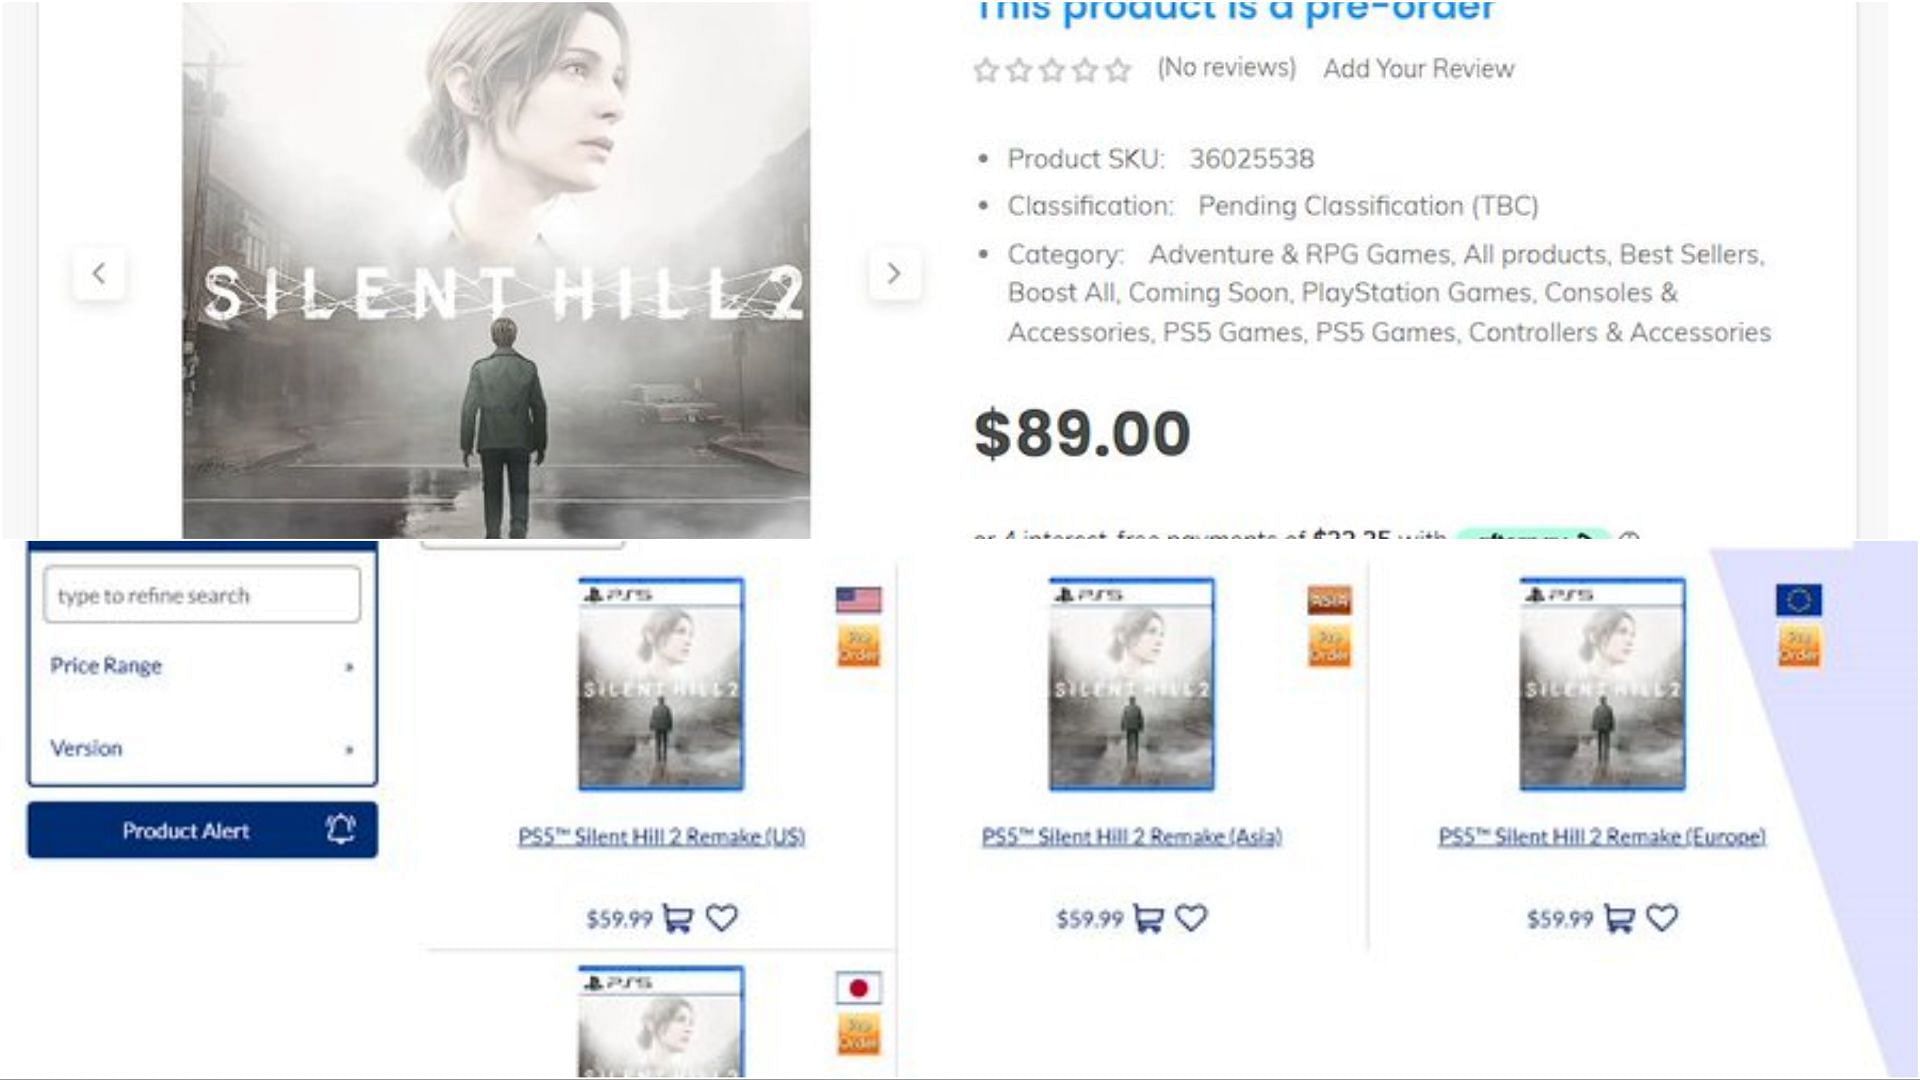 Buy Silent Hill 2 PS5 Game Pre-Order, PS5 games